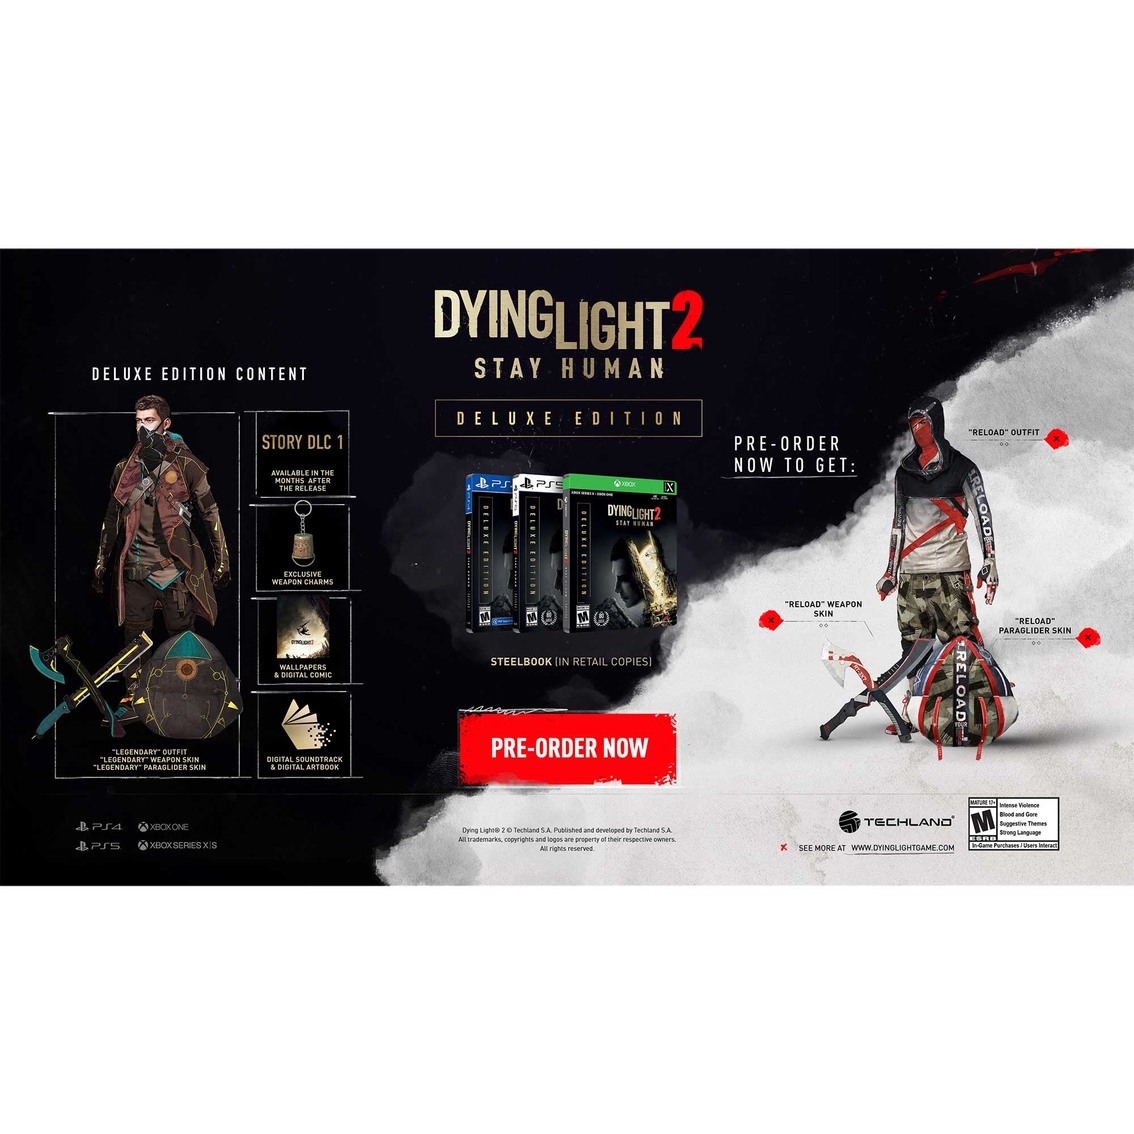 Dying Light 2 Deluxe (Xbox Series X) - Image 2 of 5